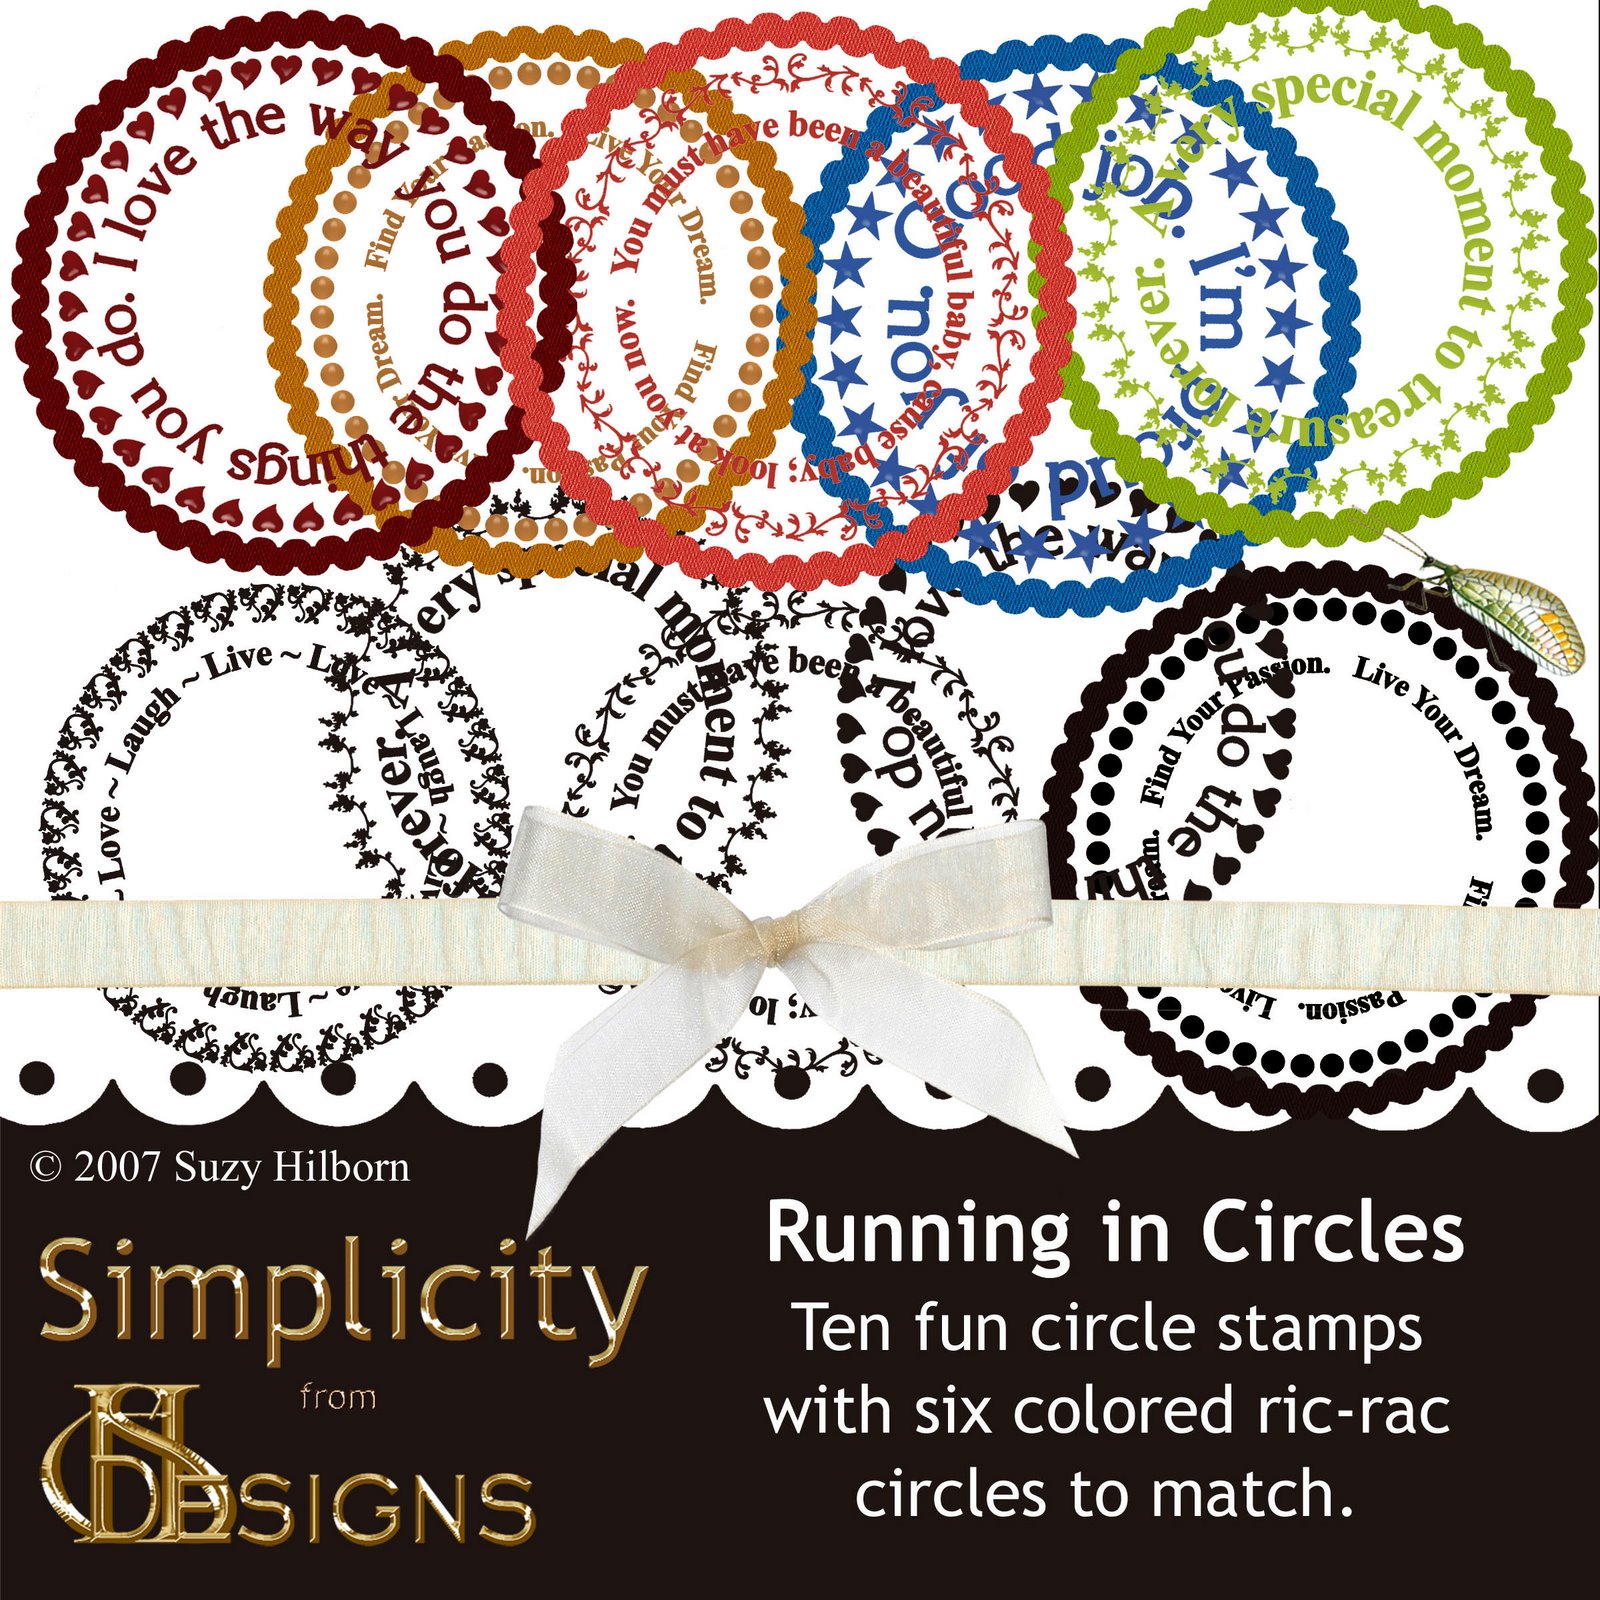 [SHI_Simplicity_Circle_Stamps_Product_Page.jpg]